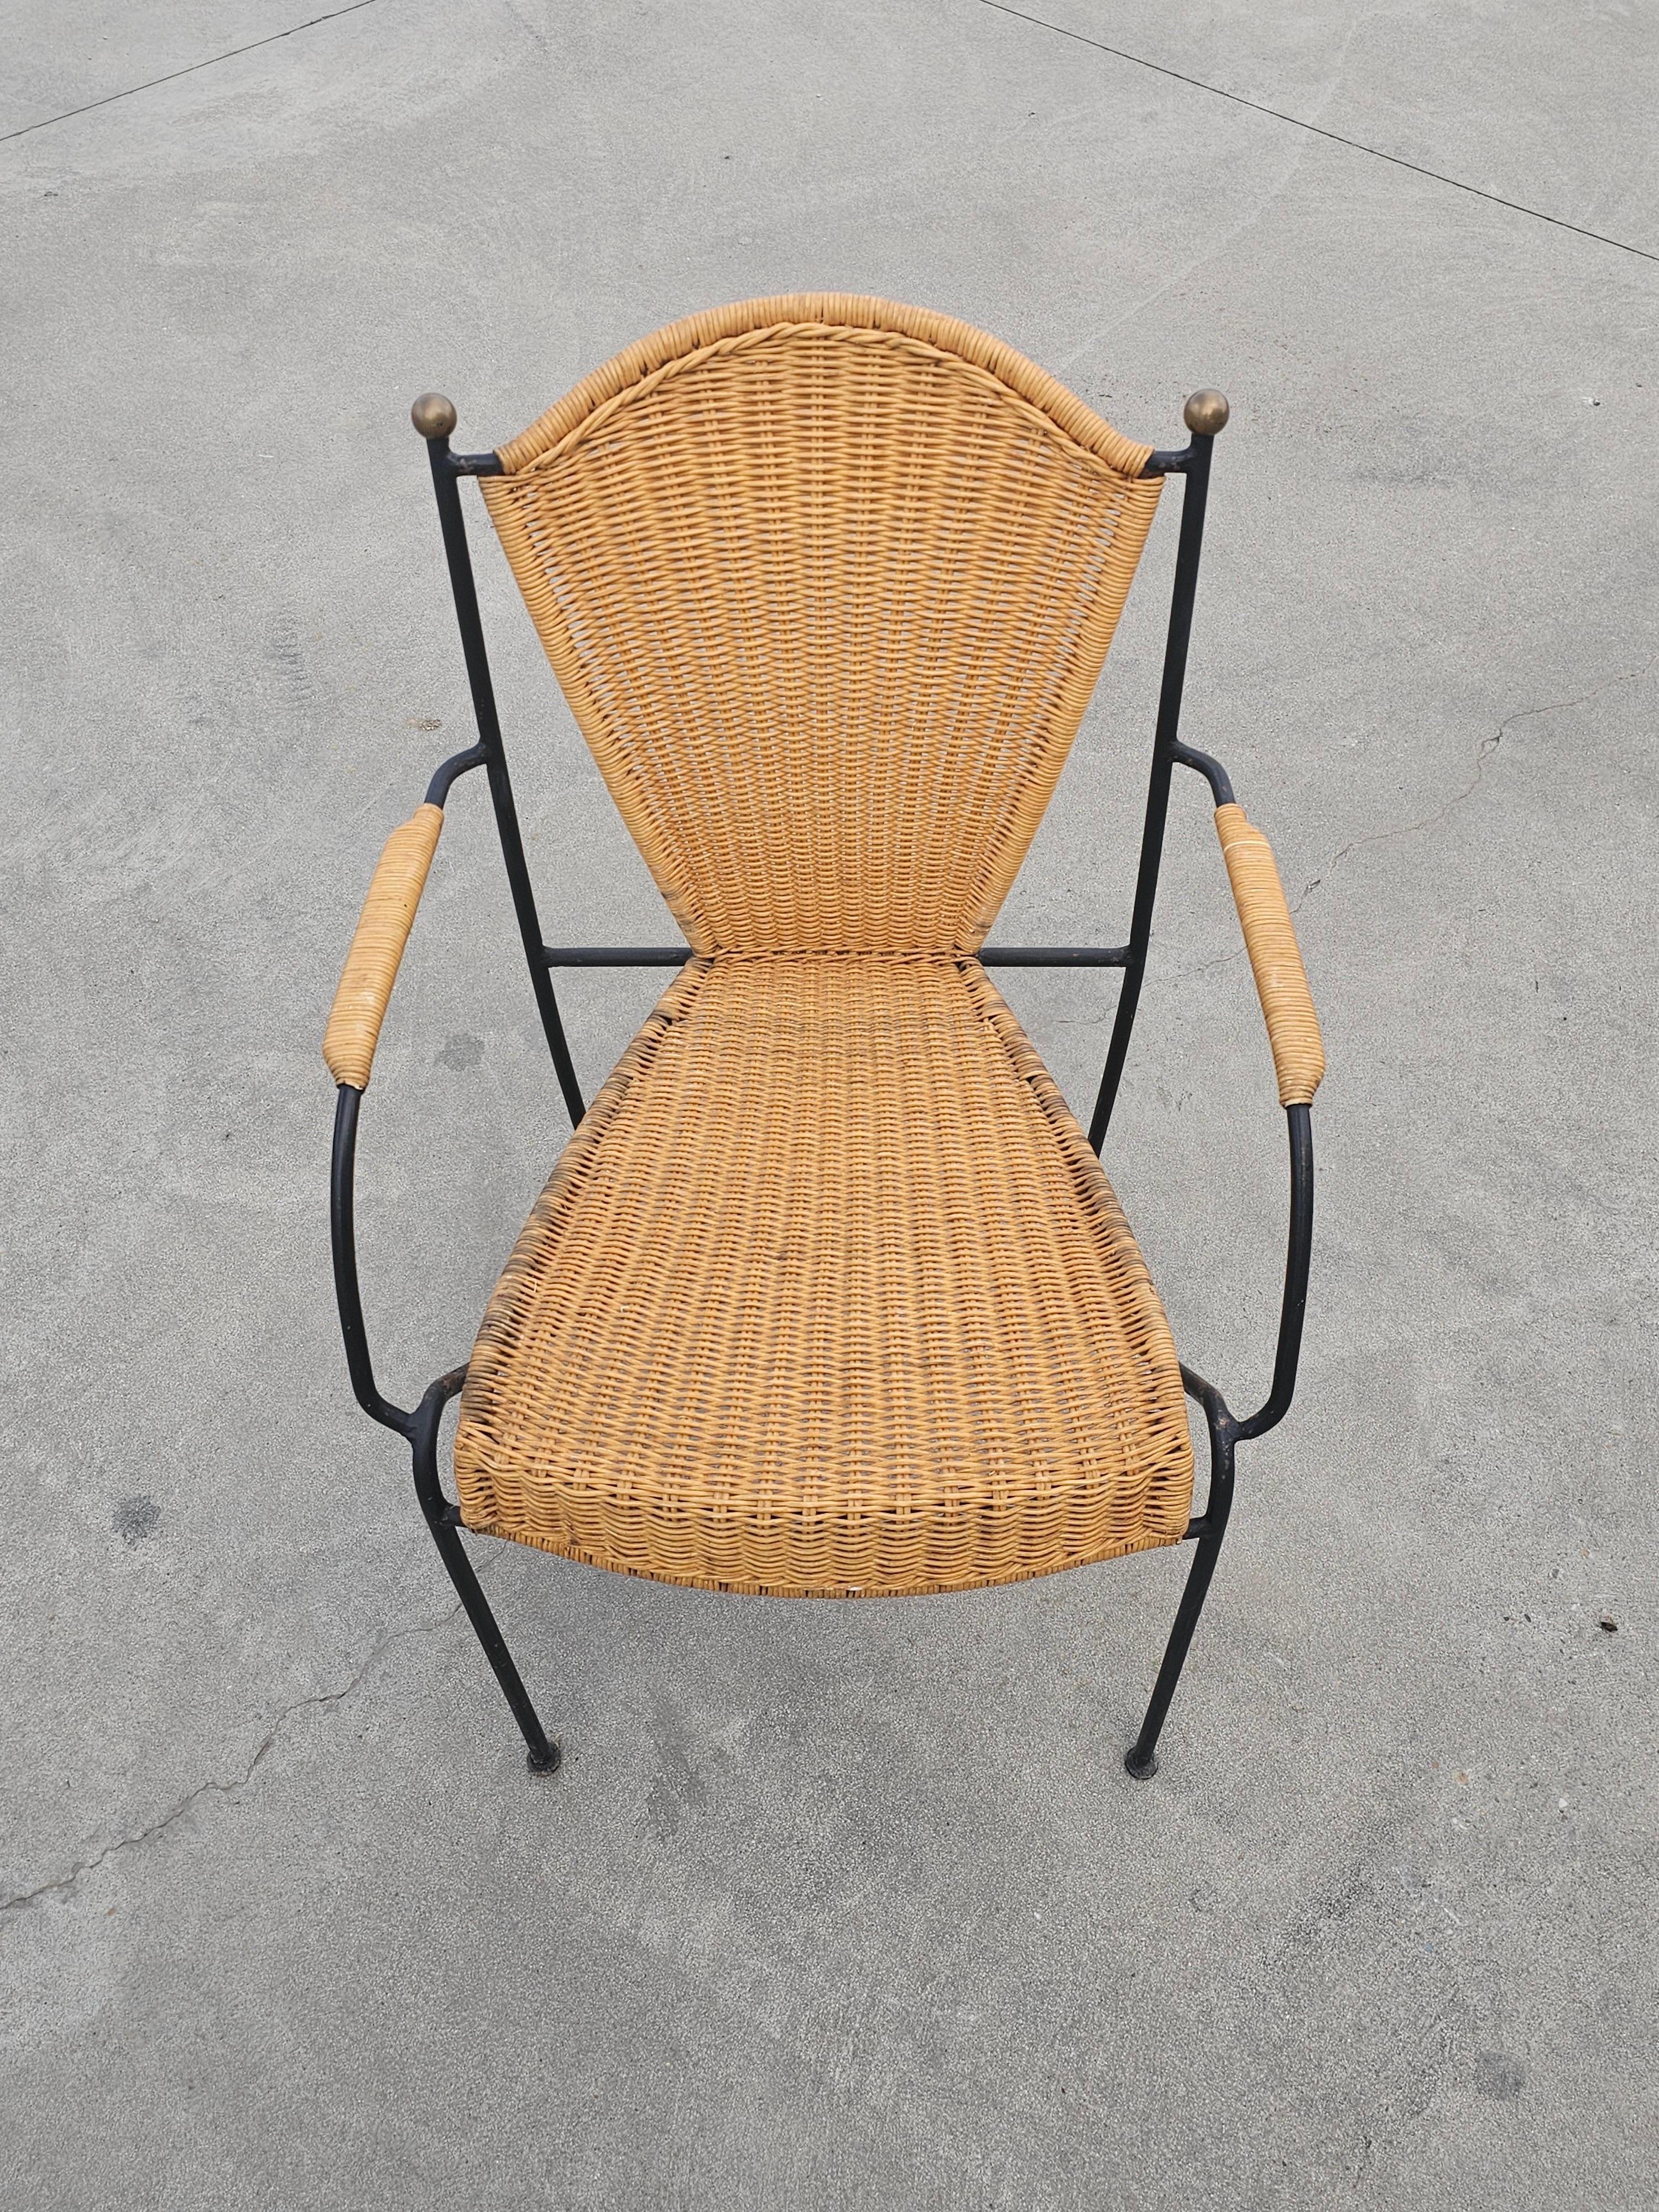 Pair of Frederic Weinberg Wicker, Wrought Iron and Brass Chairs, USA 1950s For Sale 2